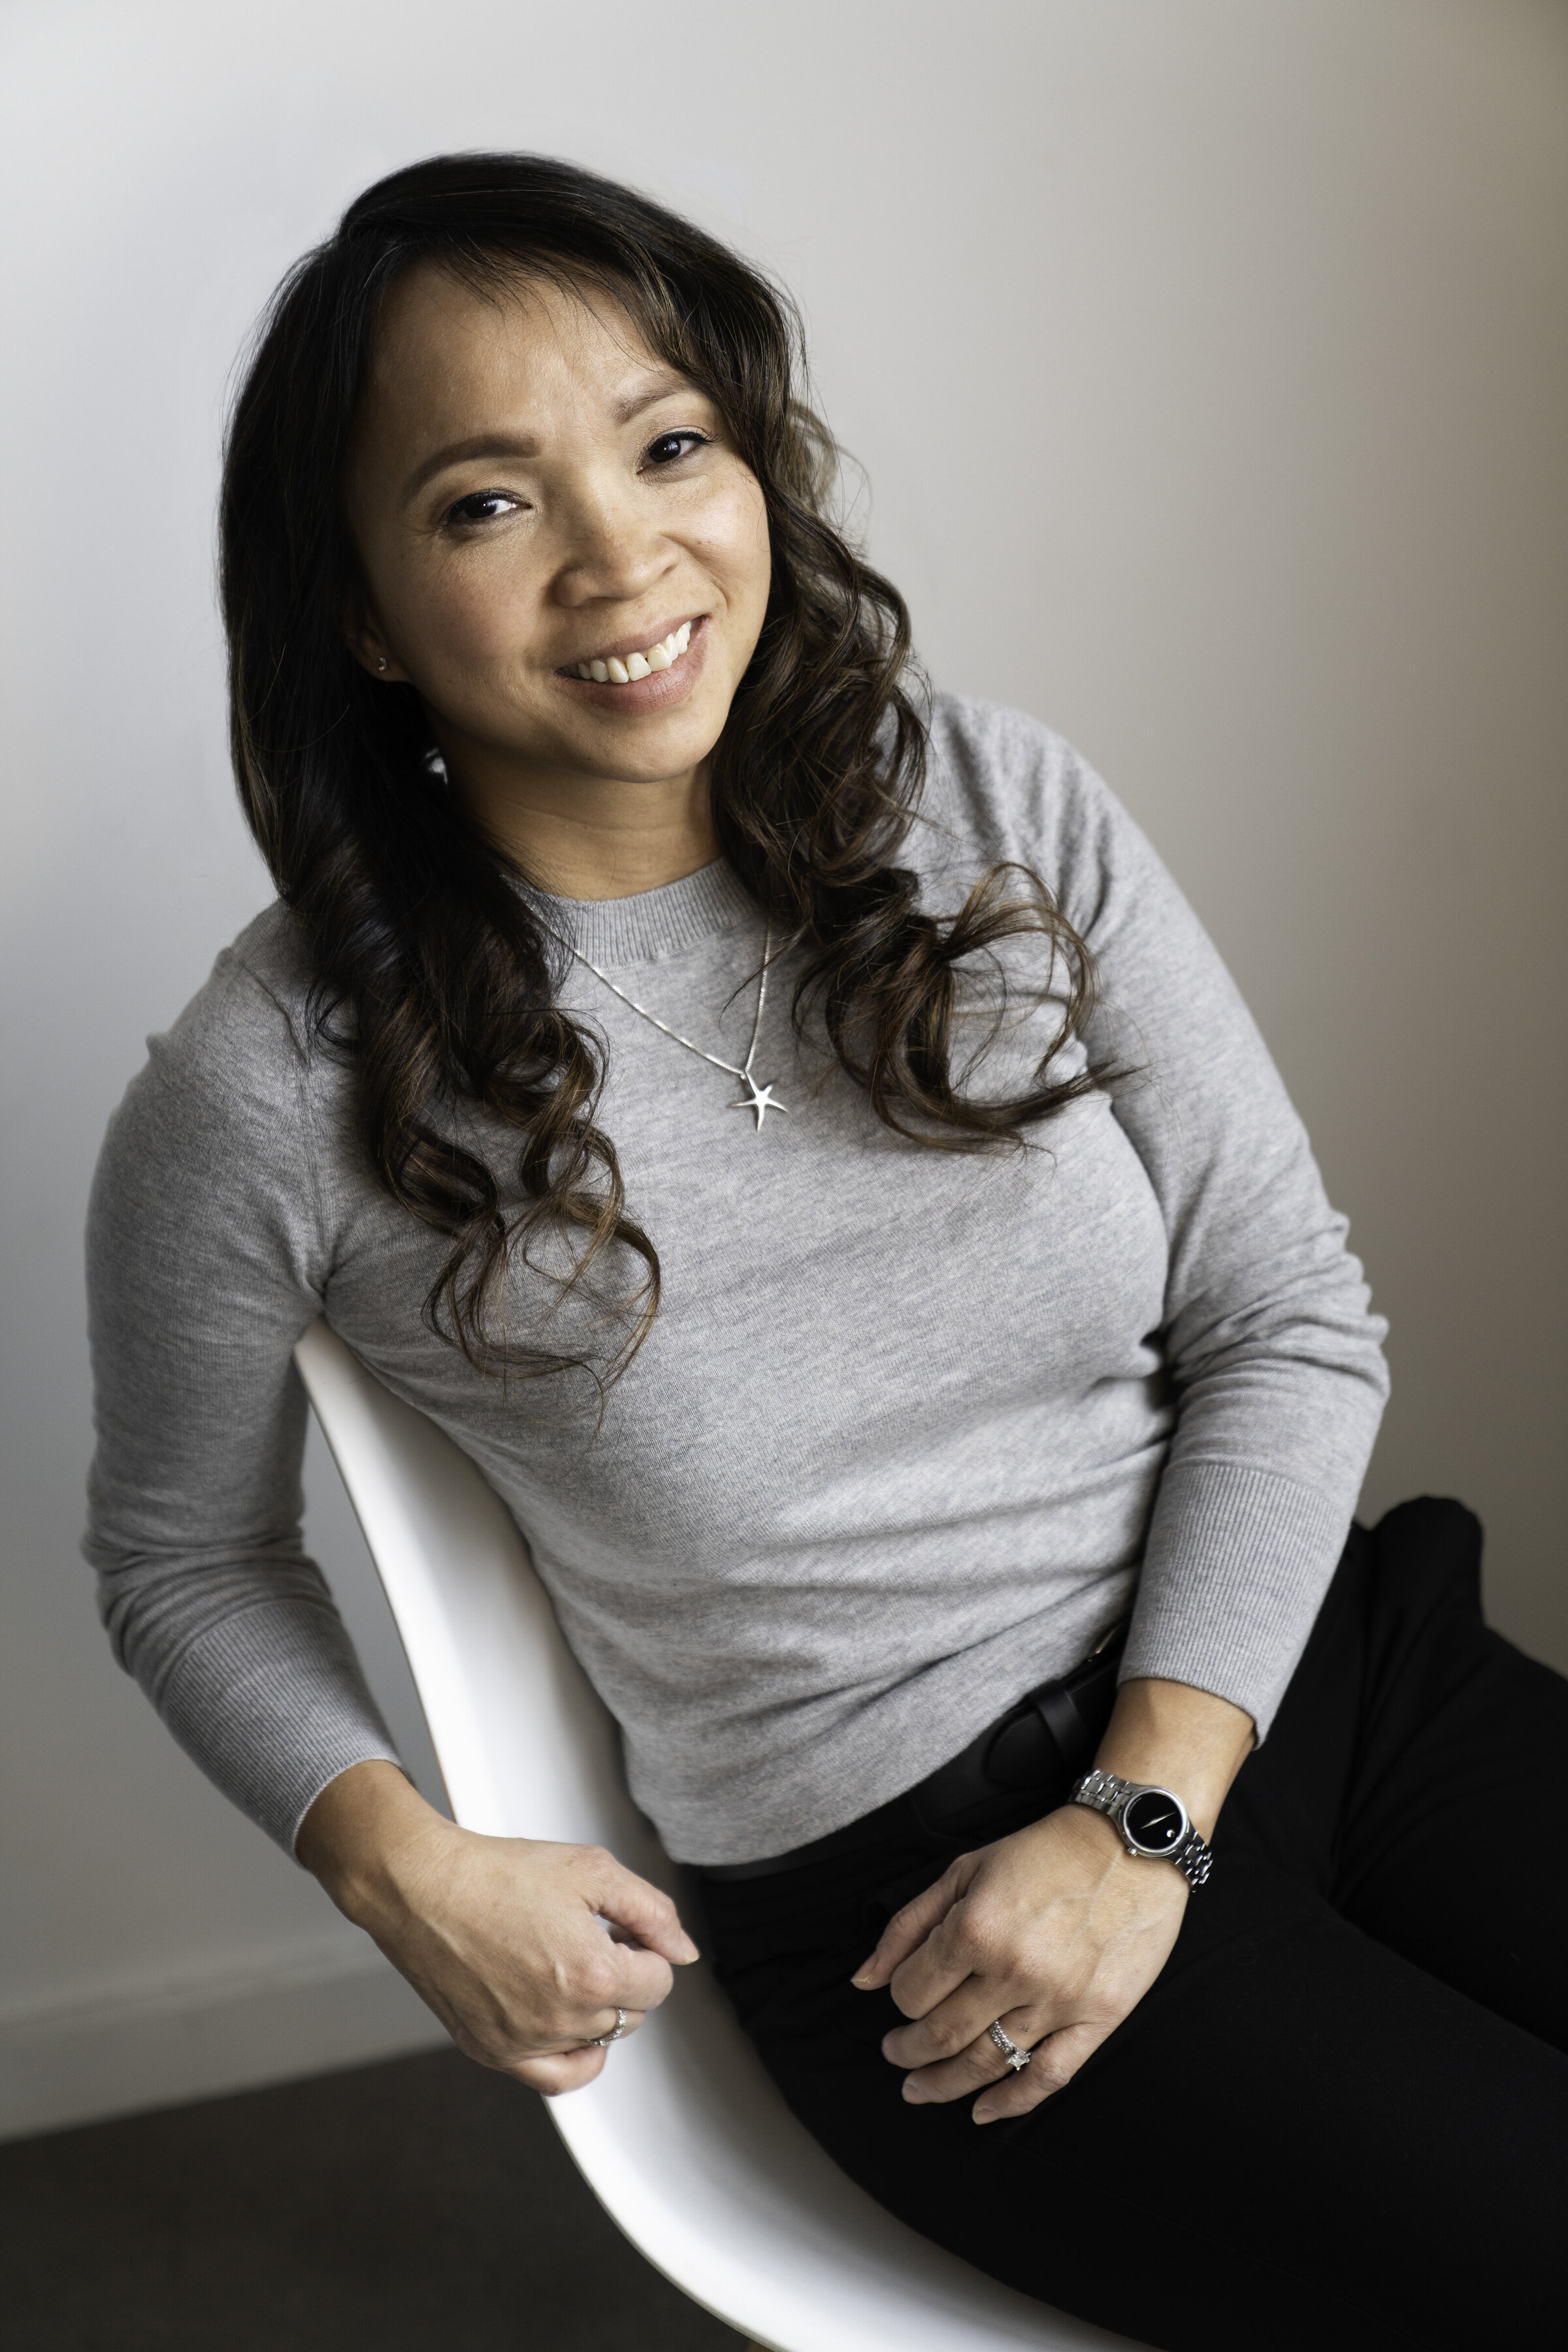 Woman sitting in a chair and smiling at the camera for her professional headshot